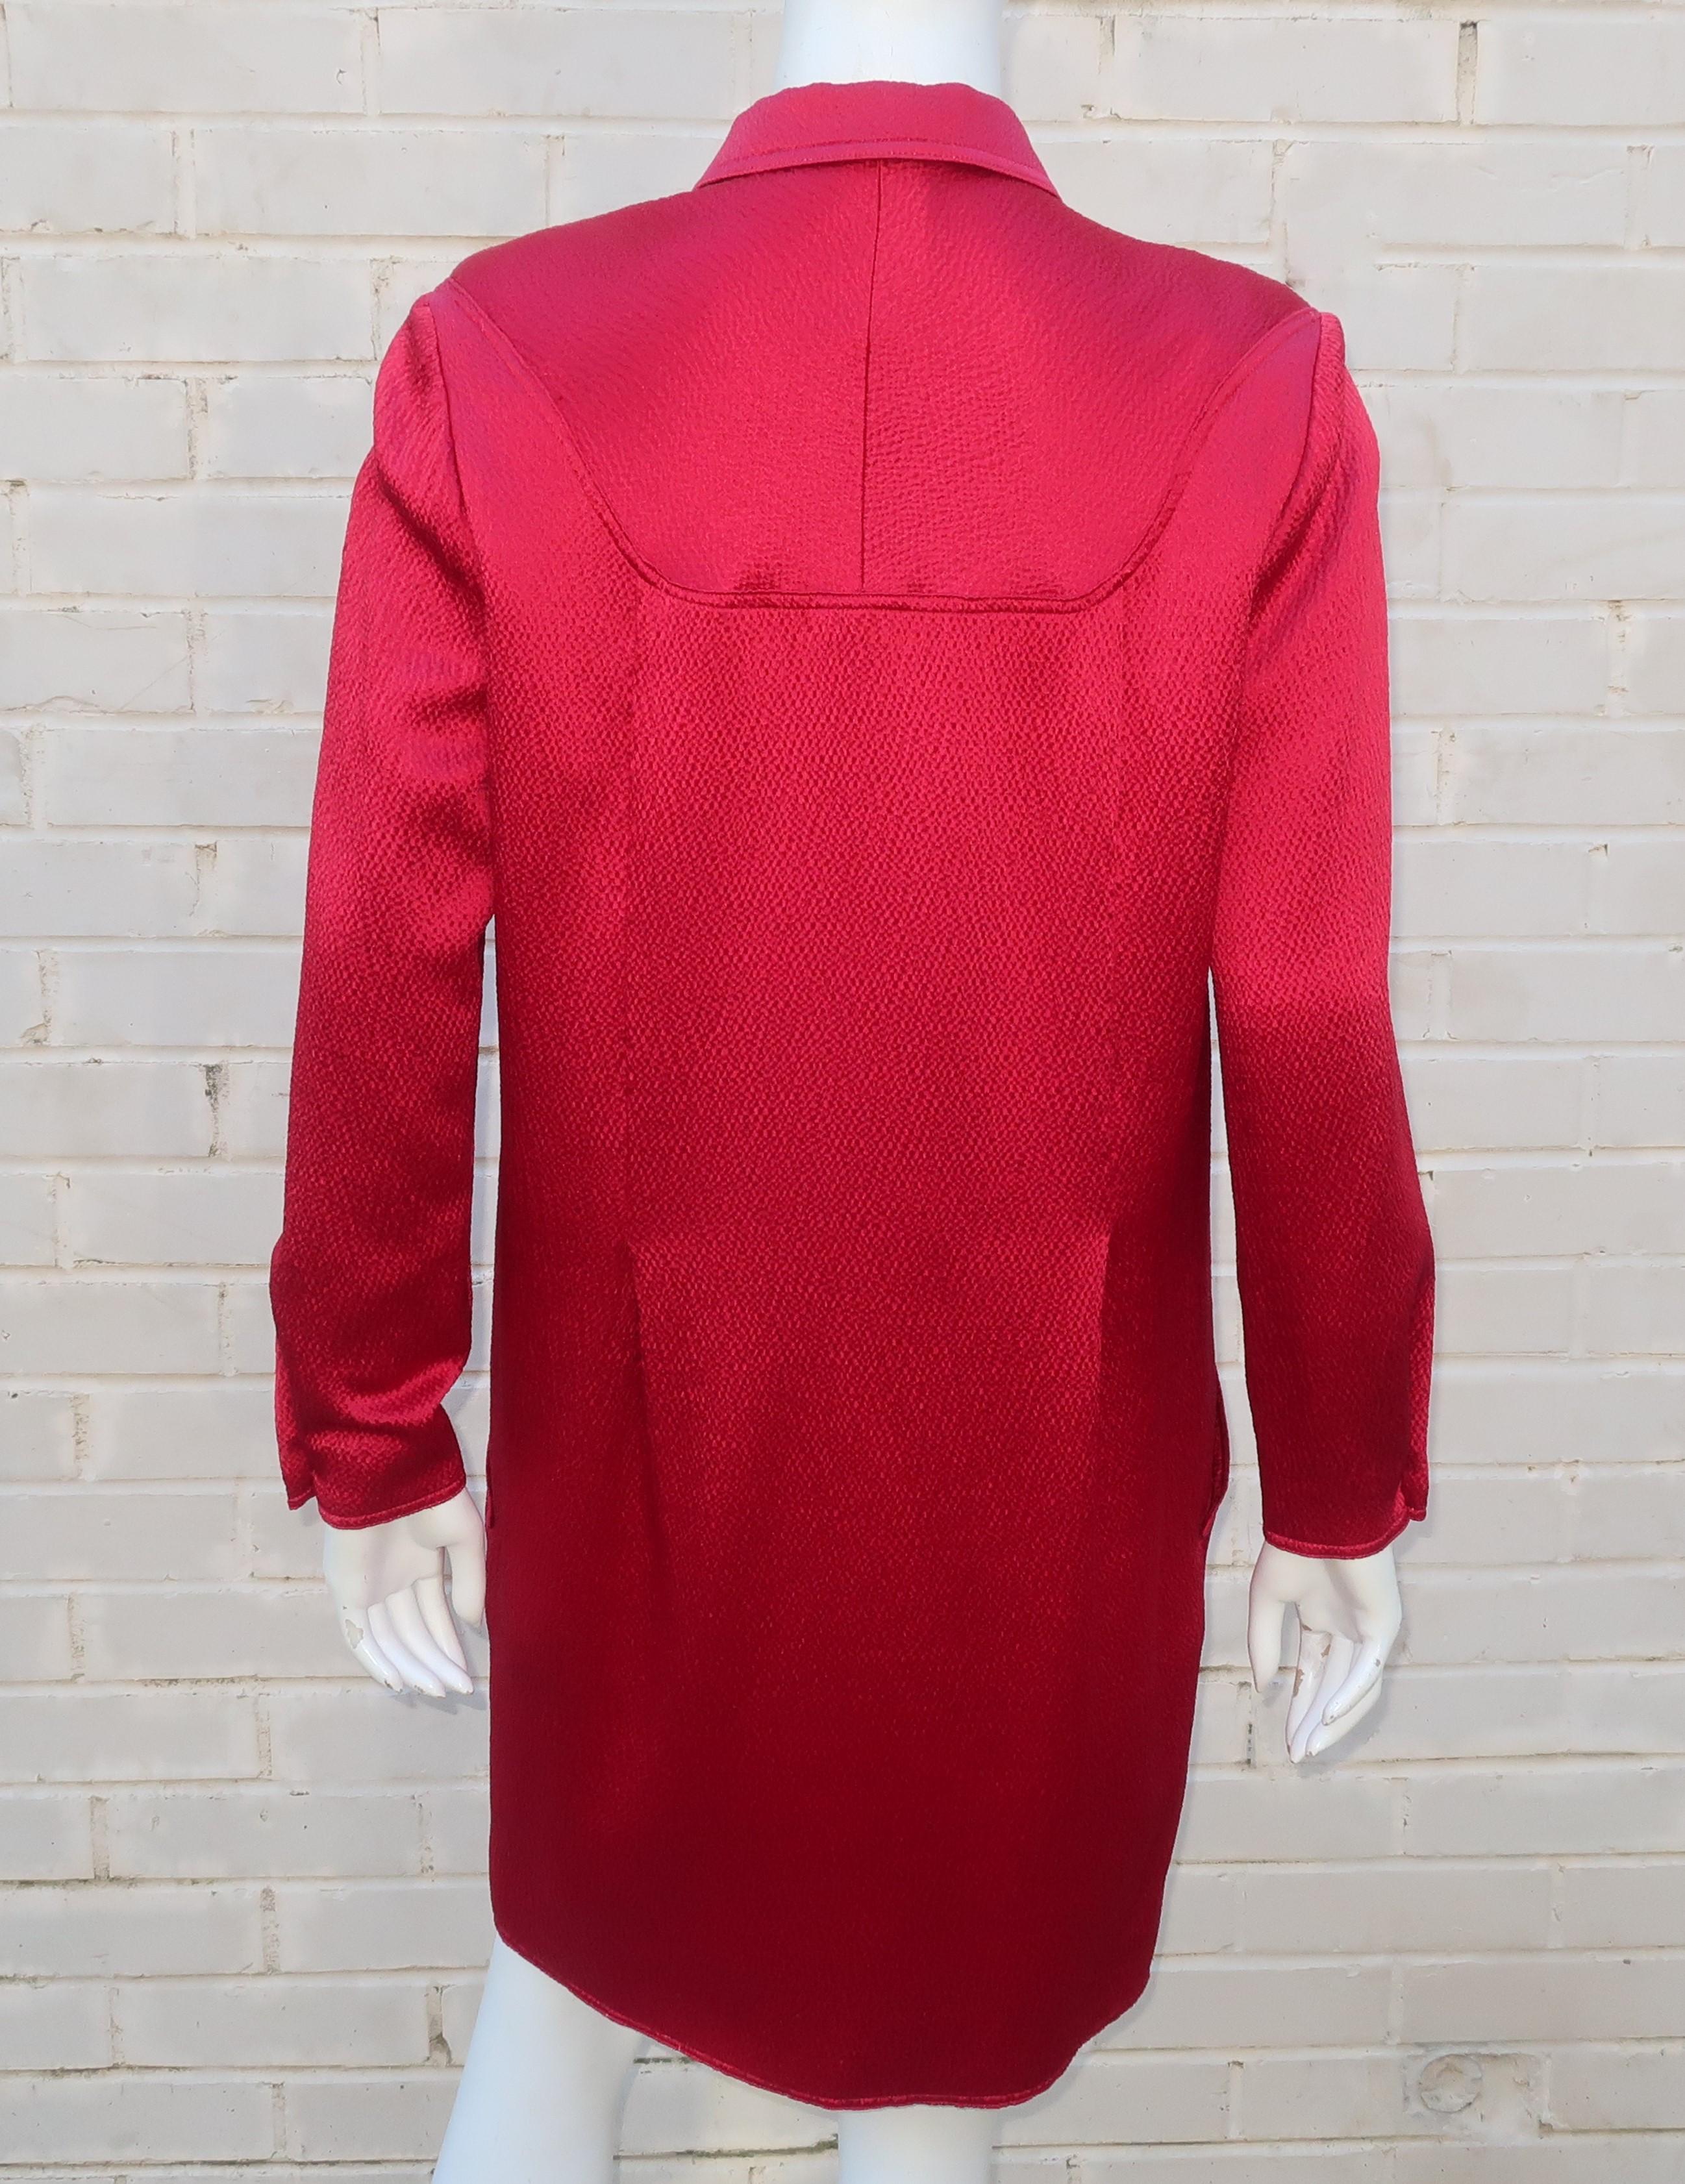 Geoffrey Beene Ruby Red Satin Shirt Dress With Lucite Buttons, 1980's 8